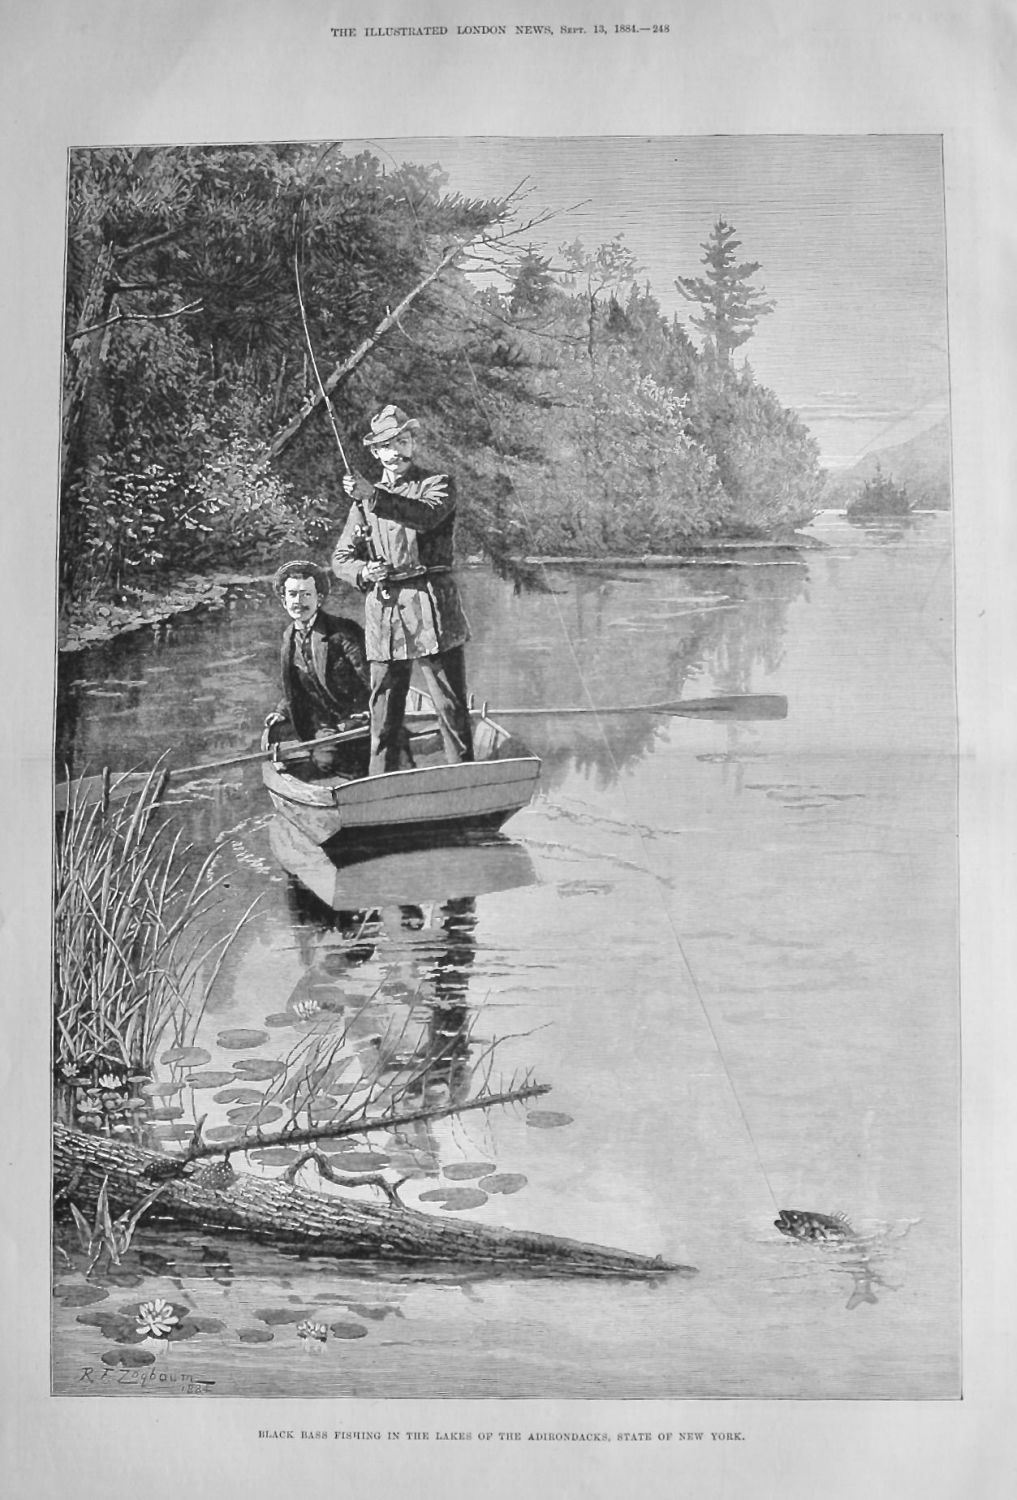 Black Bass Fishing in the Lakes of the Adirondacks, State of New York.  188